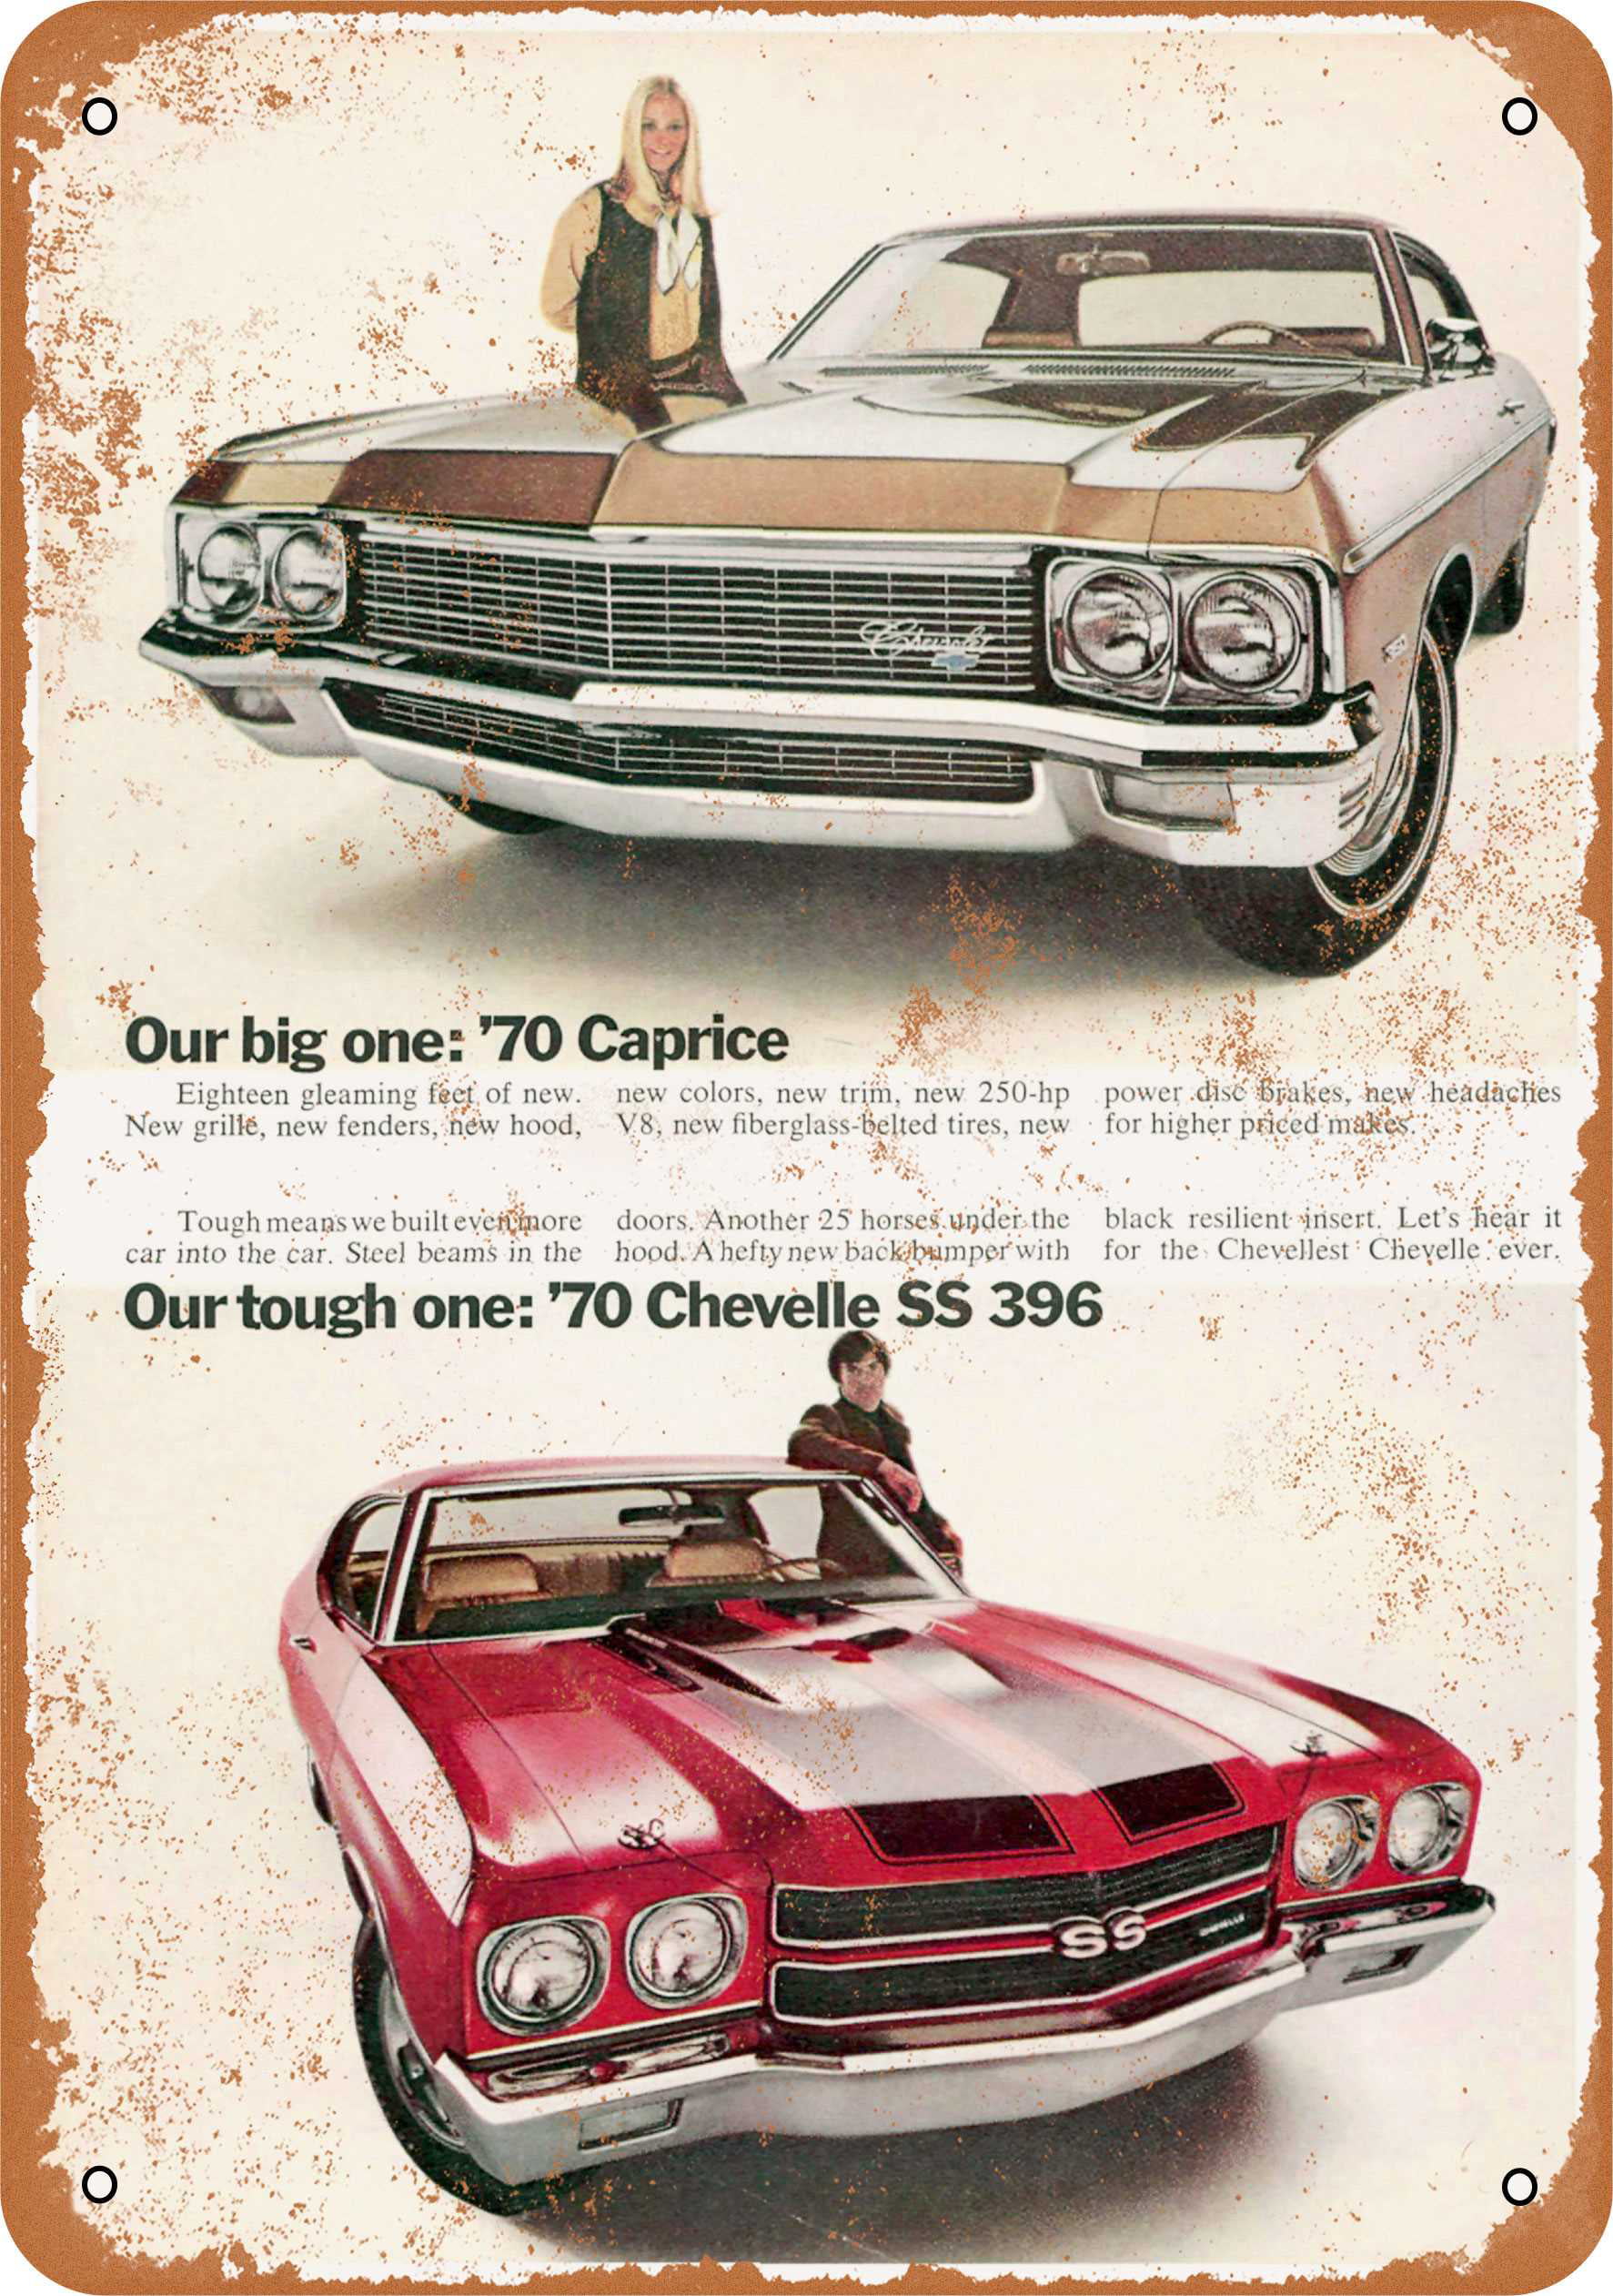 1970 Chevrolet Chevelle Photo Classic Cars Convertible Print Vintage Poster